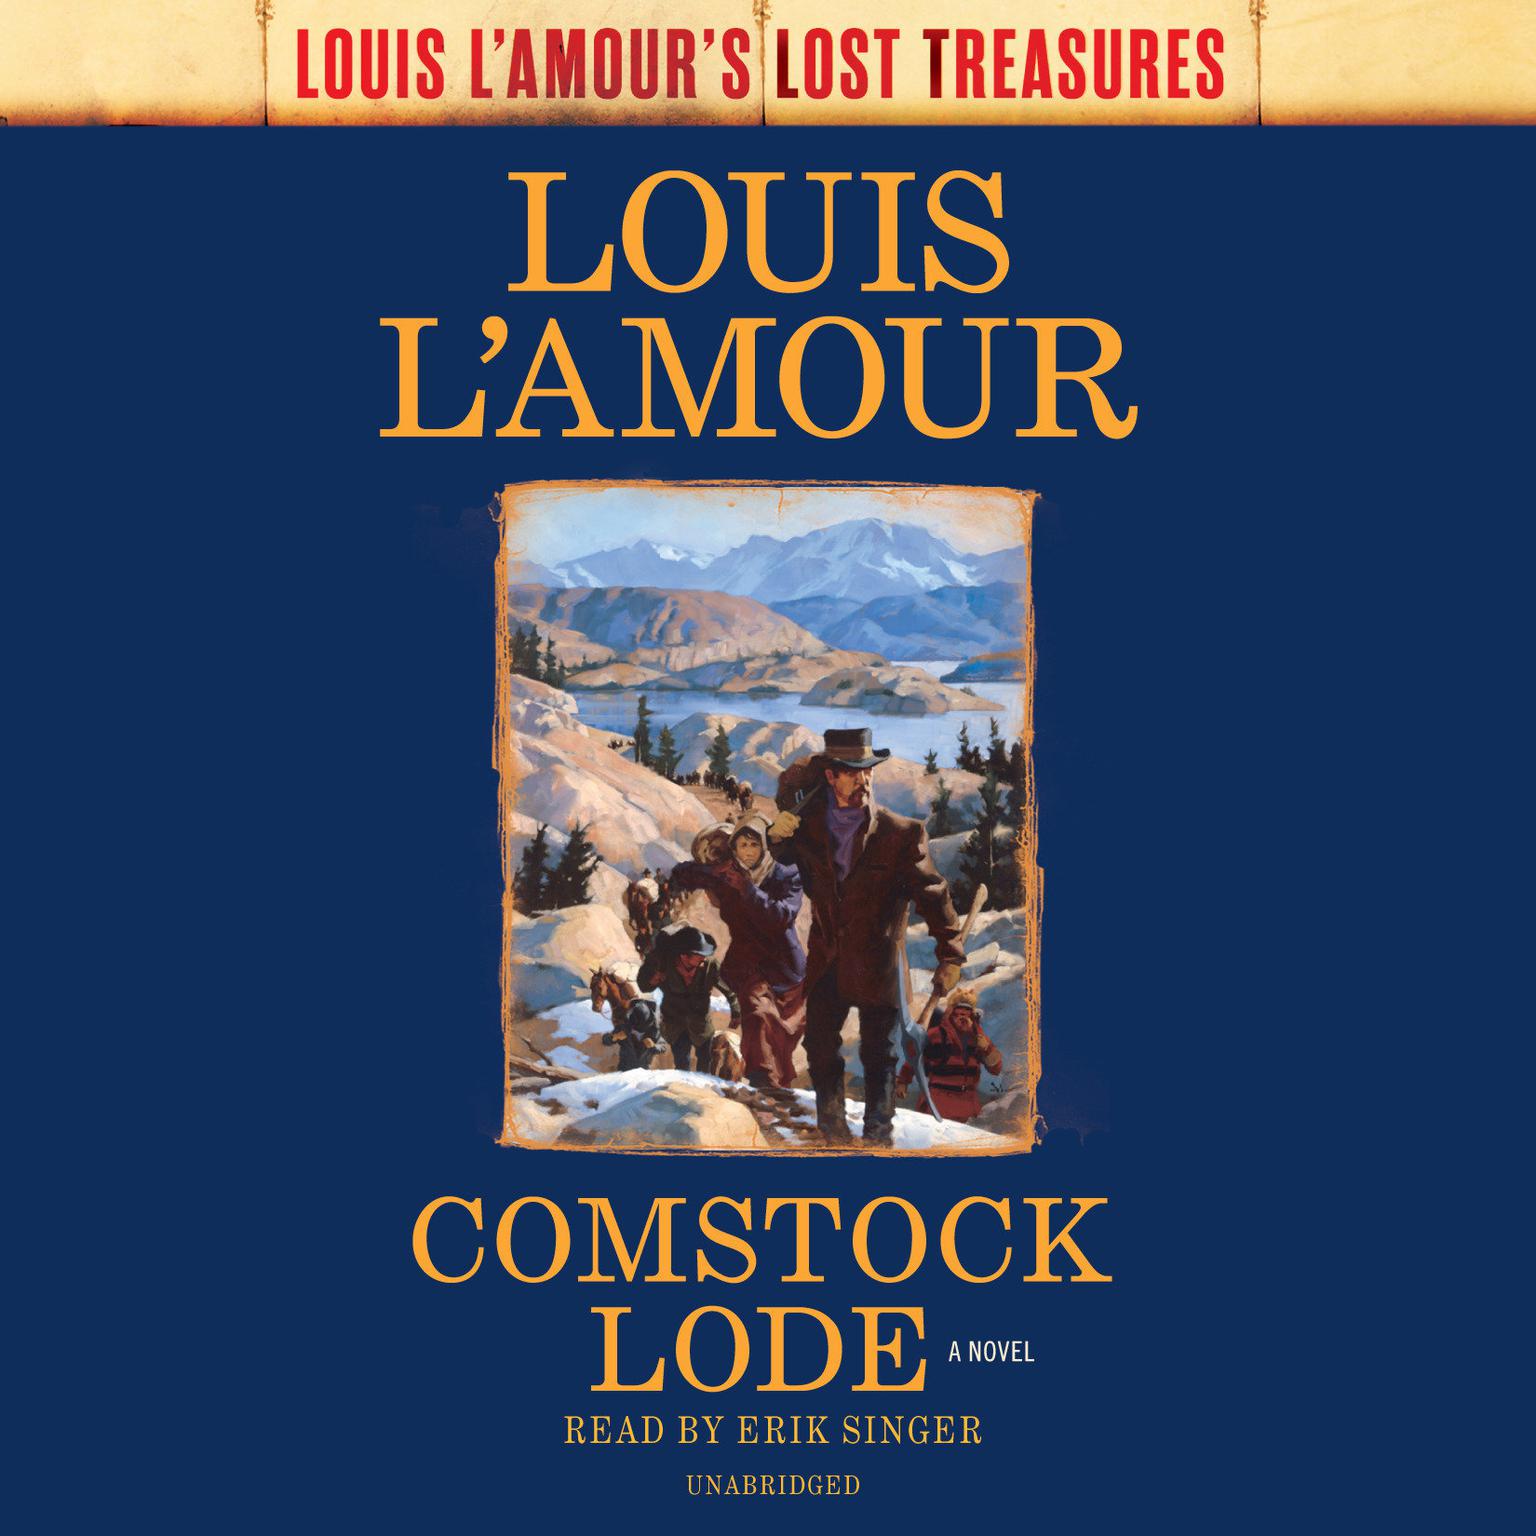 Comstock Lode (Louis LAmours Lost Treasures) Audiobook, by Louis L’Amour